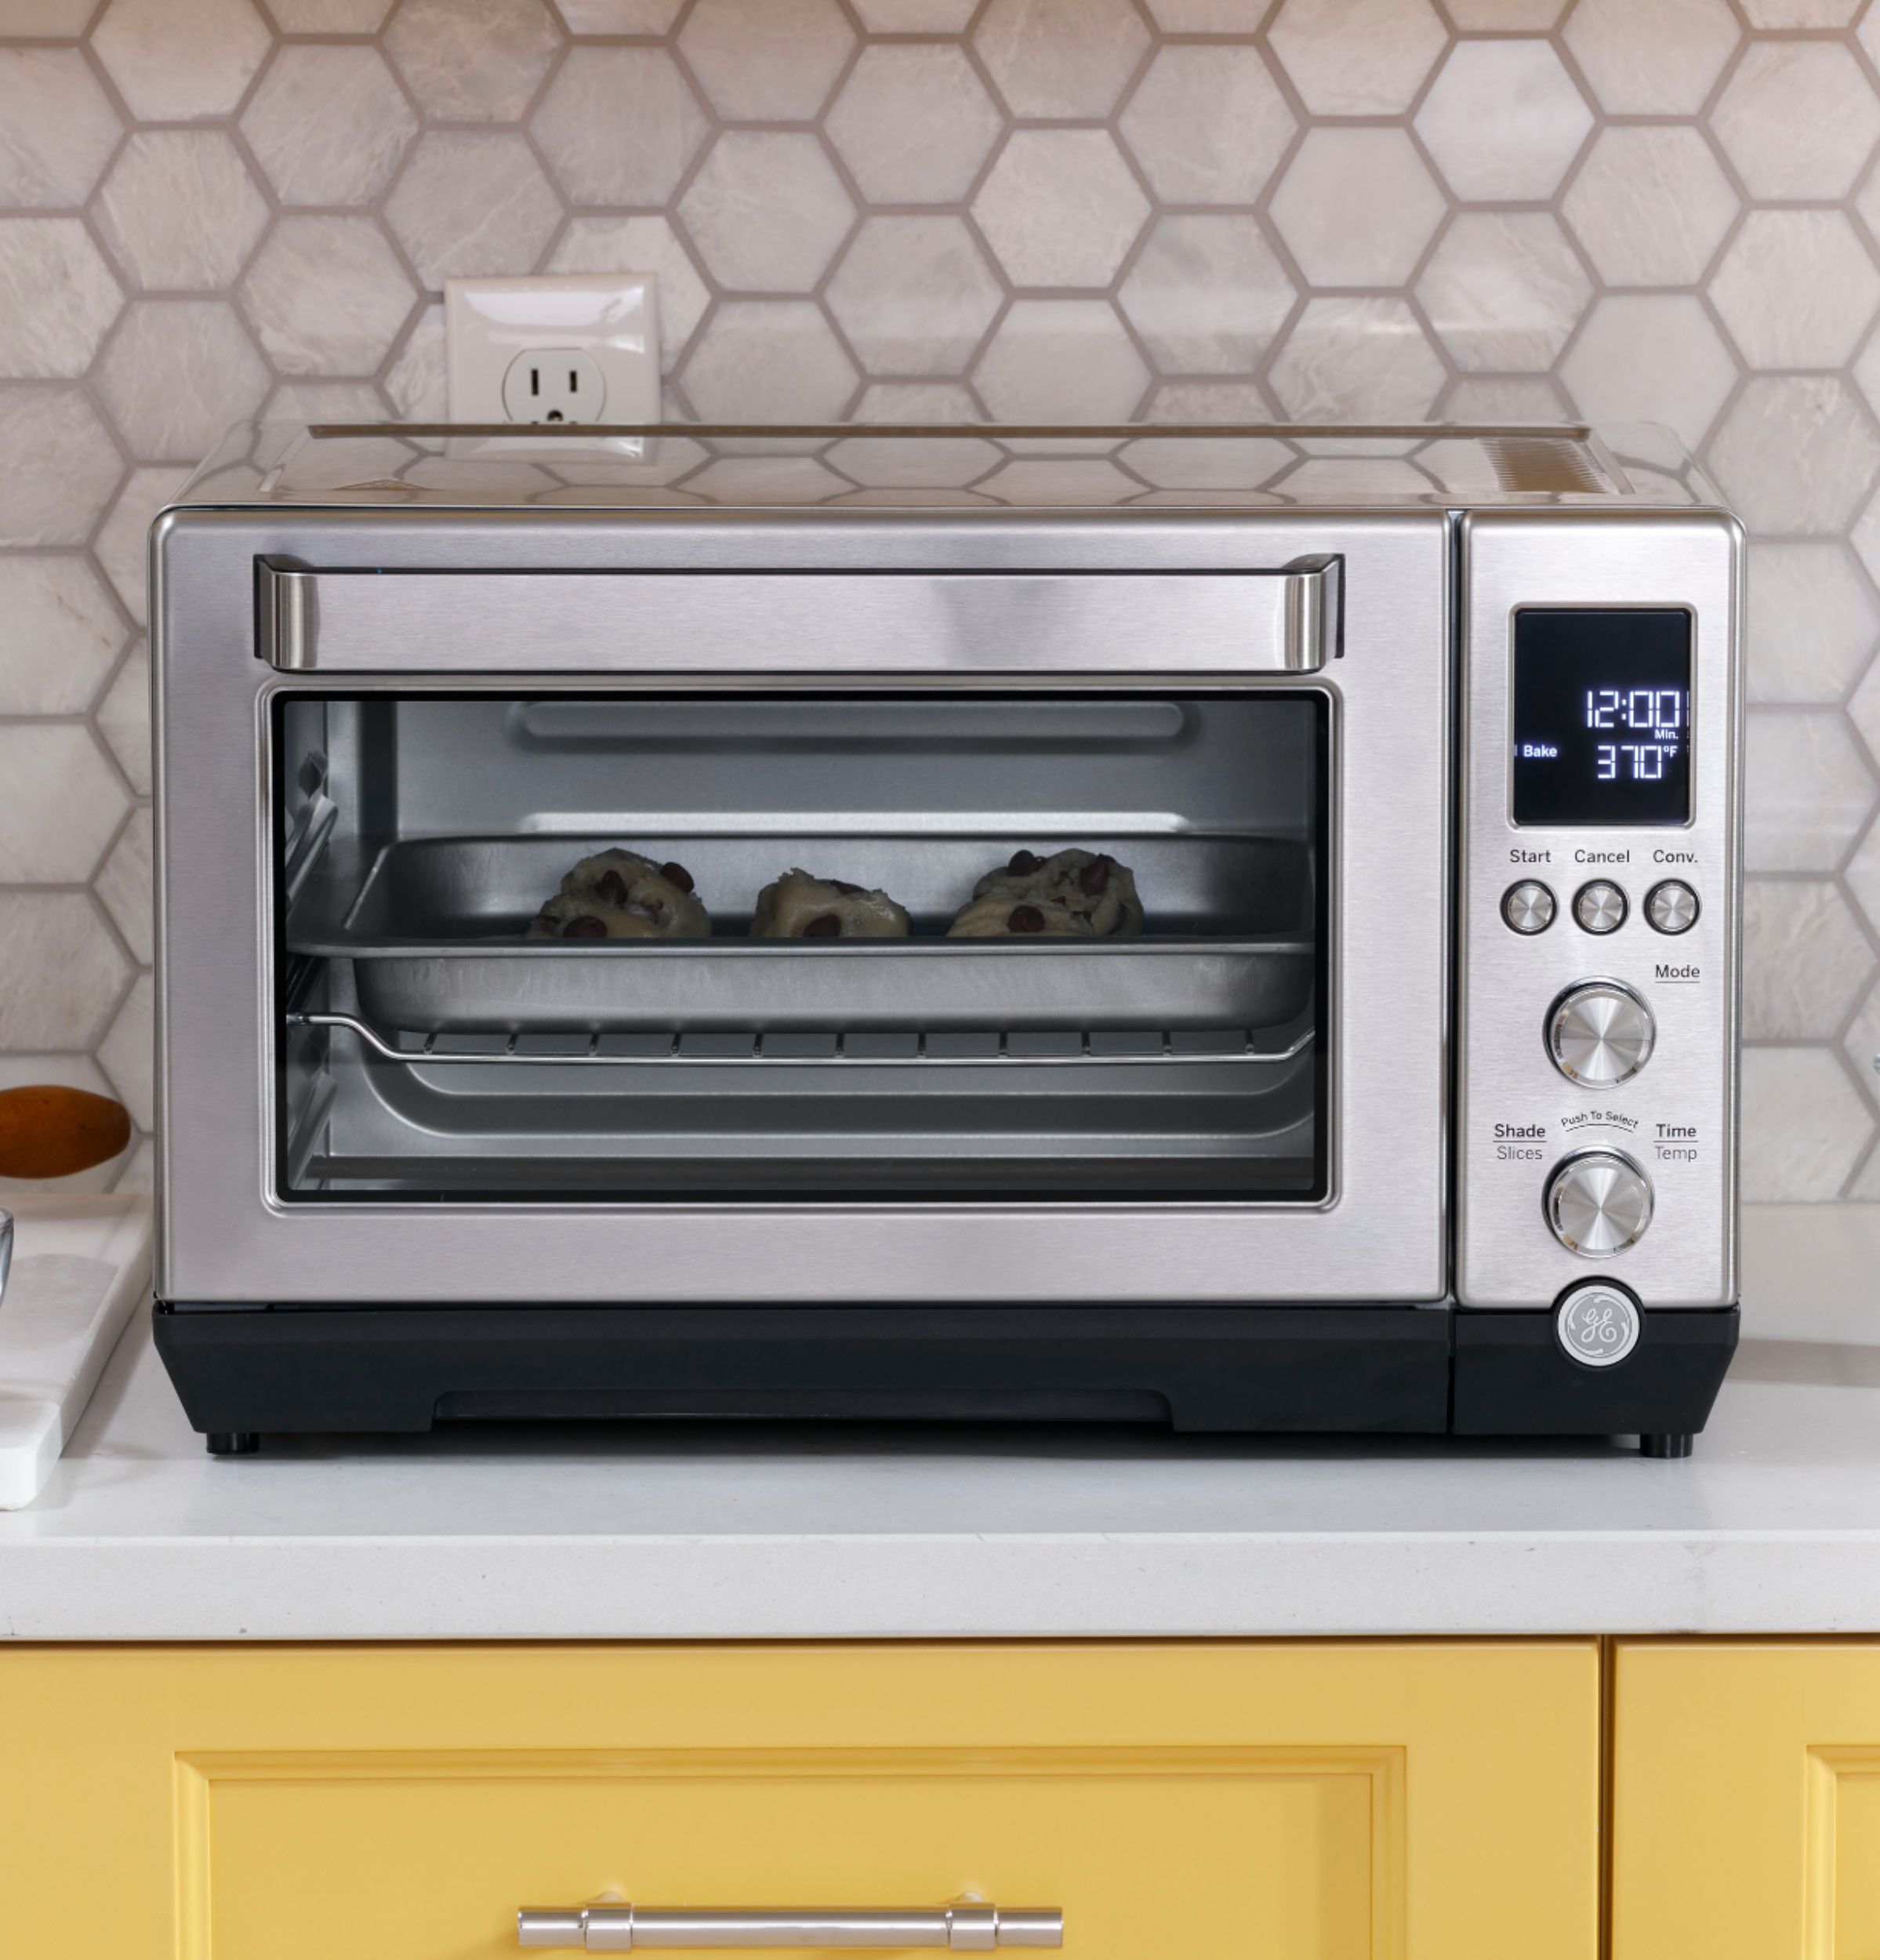 BLACK+DECKER 1500 W 6-Slice Stainless Steel Toaster Oven with